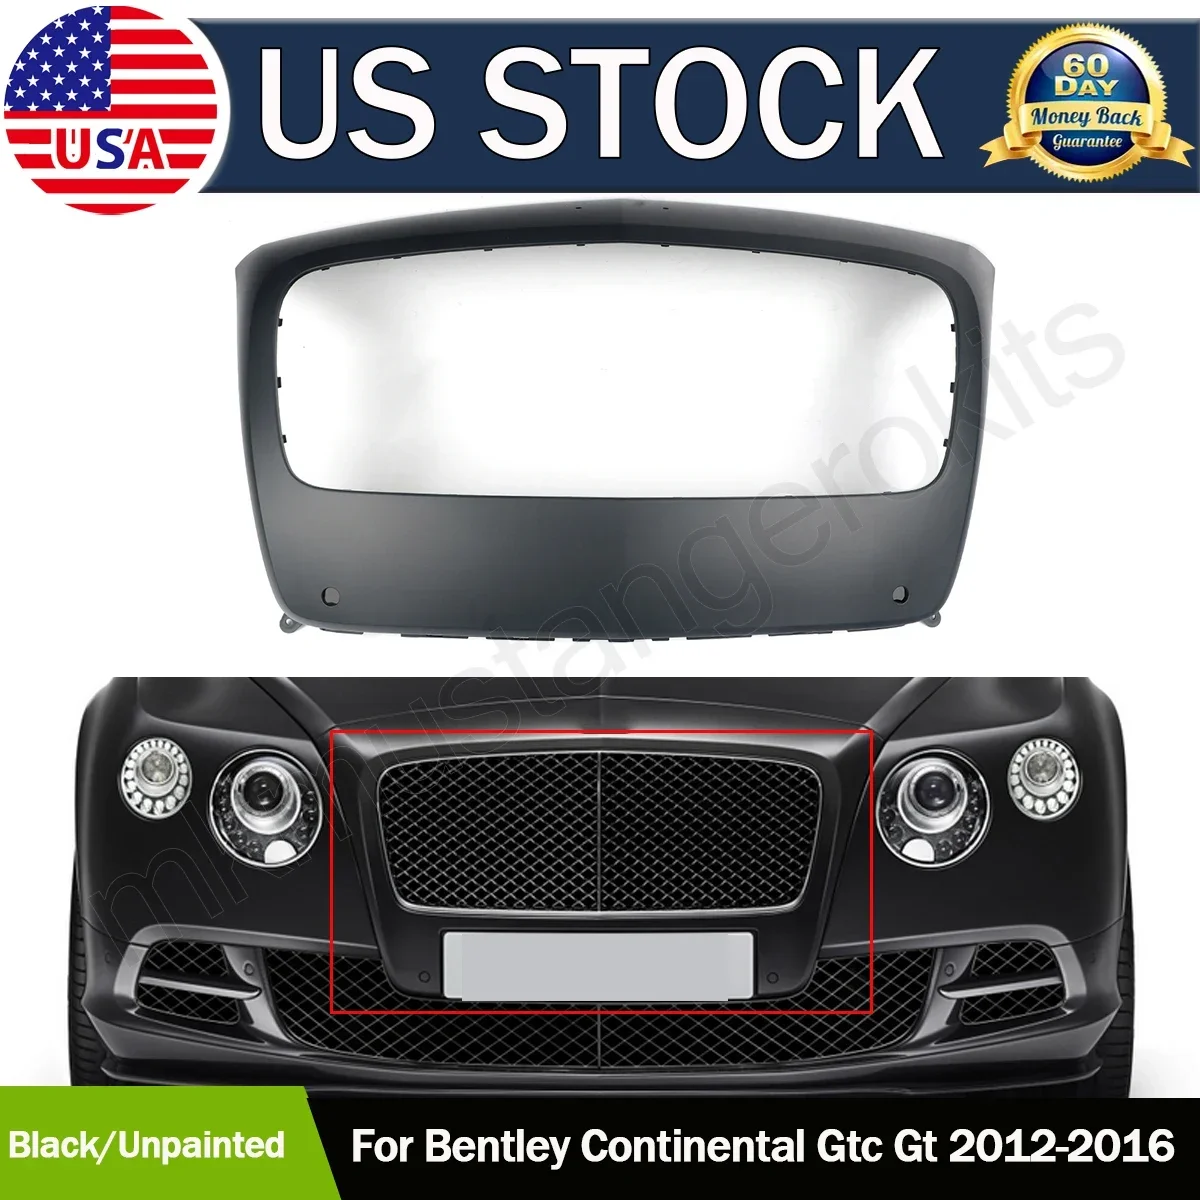 

Radiator Grille Surround Fits for Bentley Continental Gtc Gt 2012-2016 Grille Frame